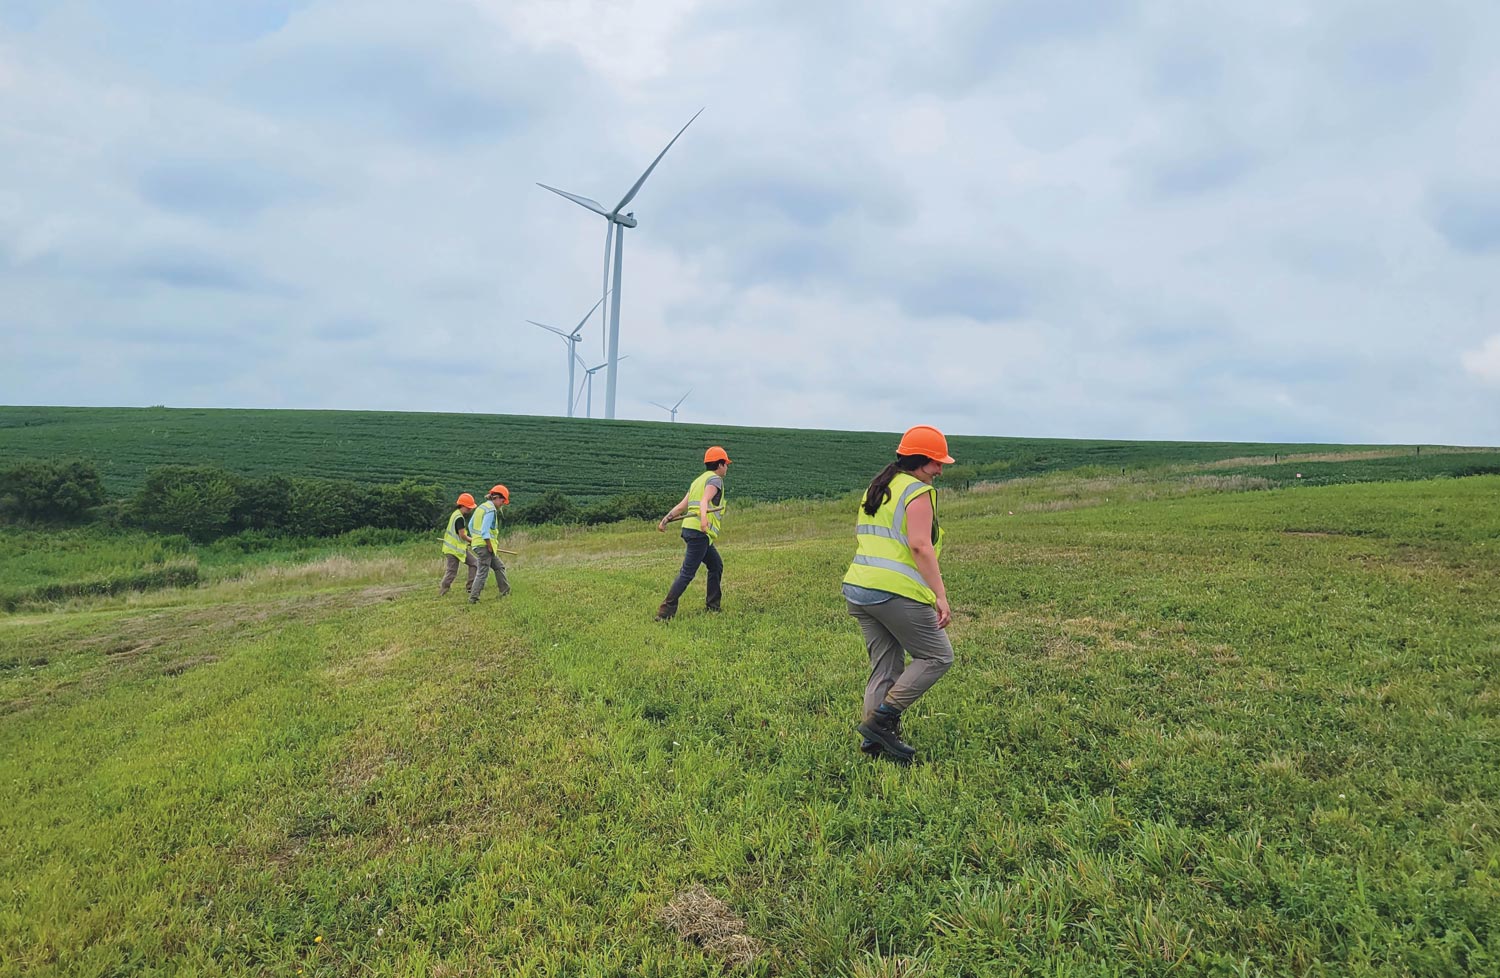 teams employed by BCI conduct sweeps in a large green field that contains wind turbines in the distance